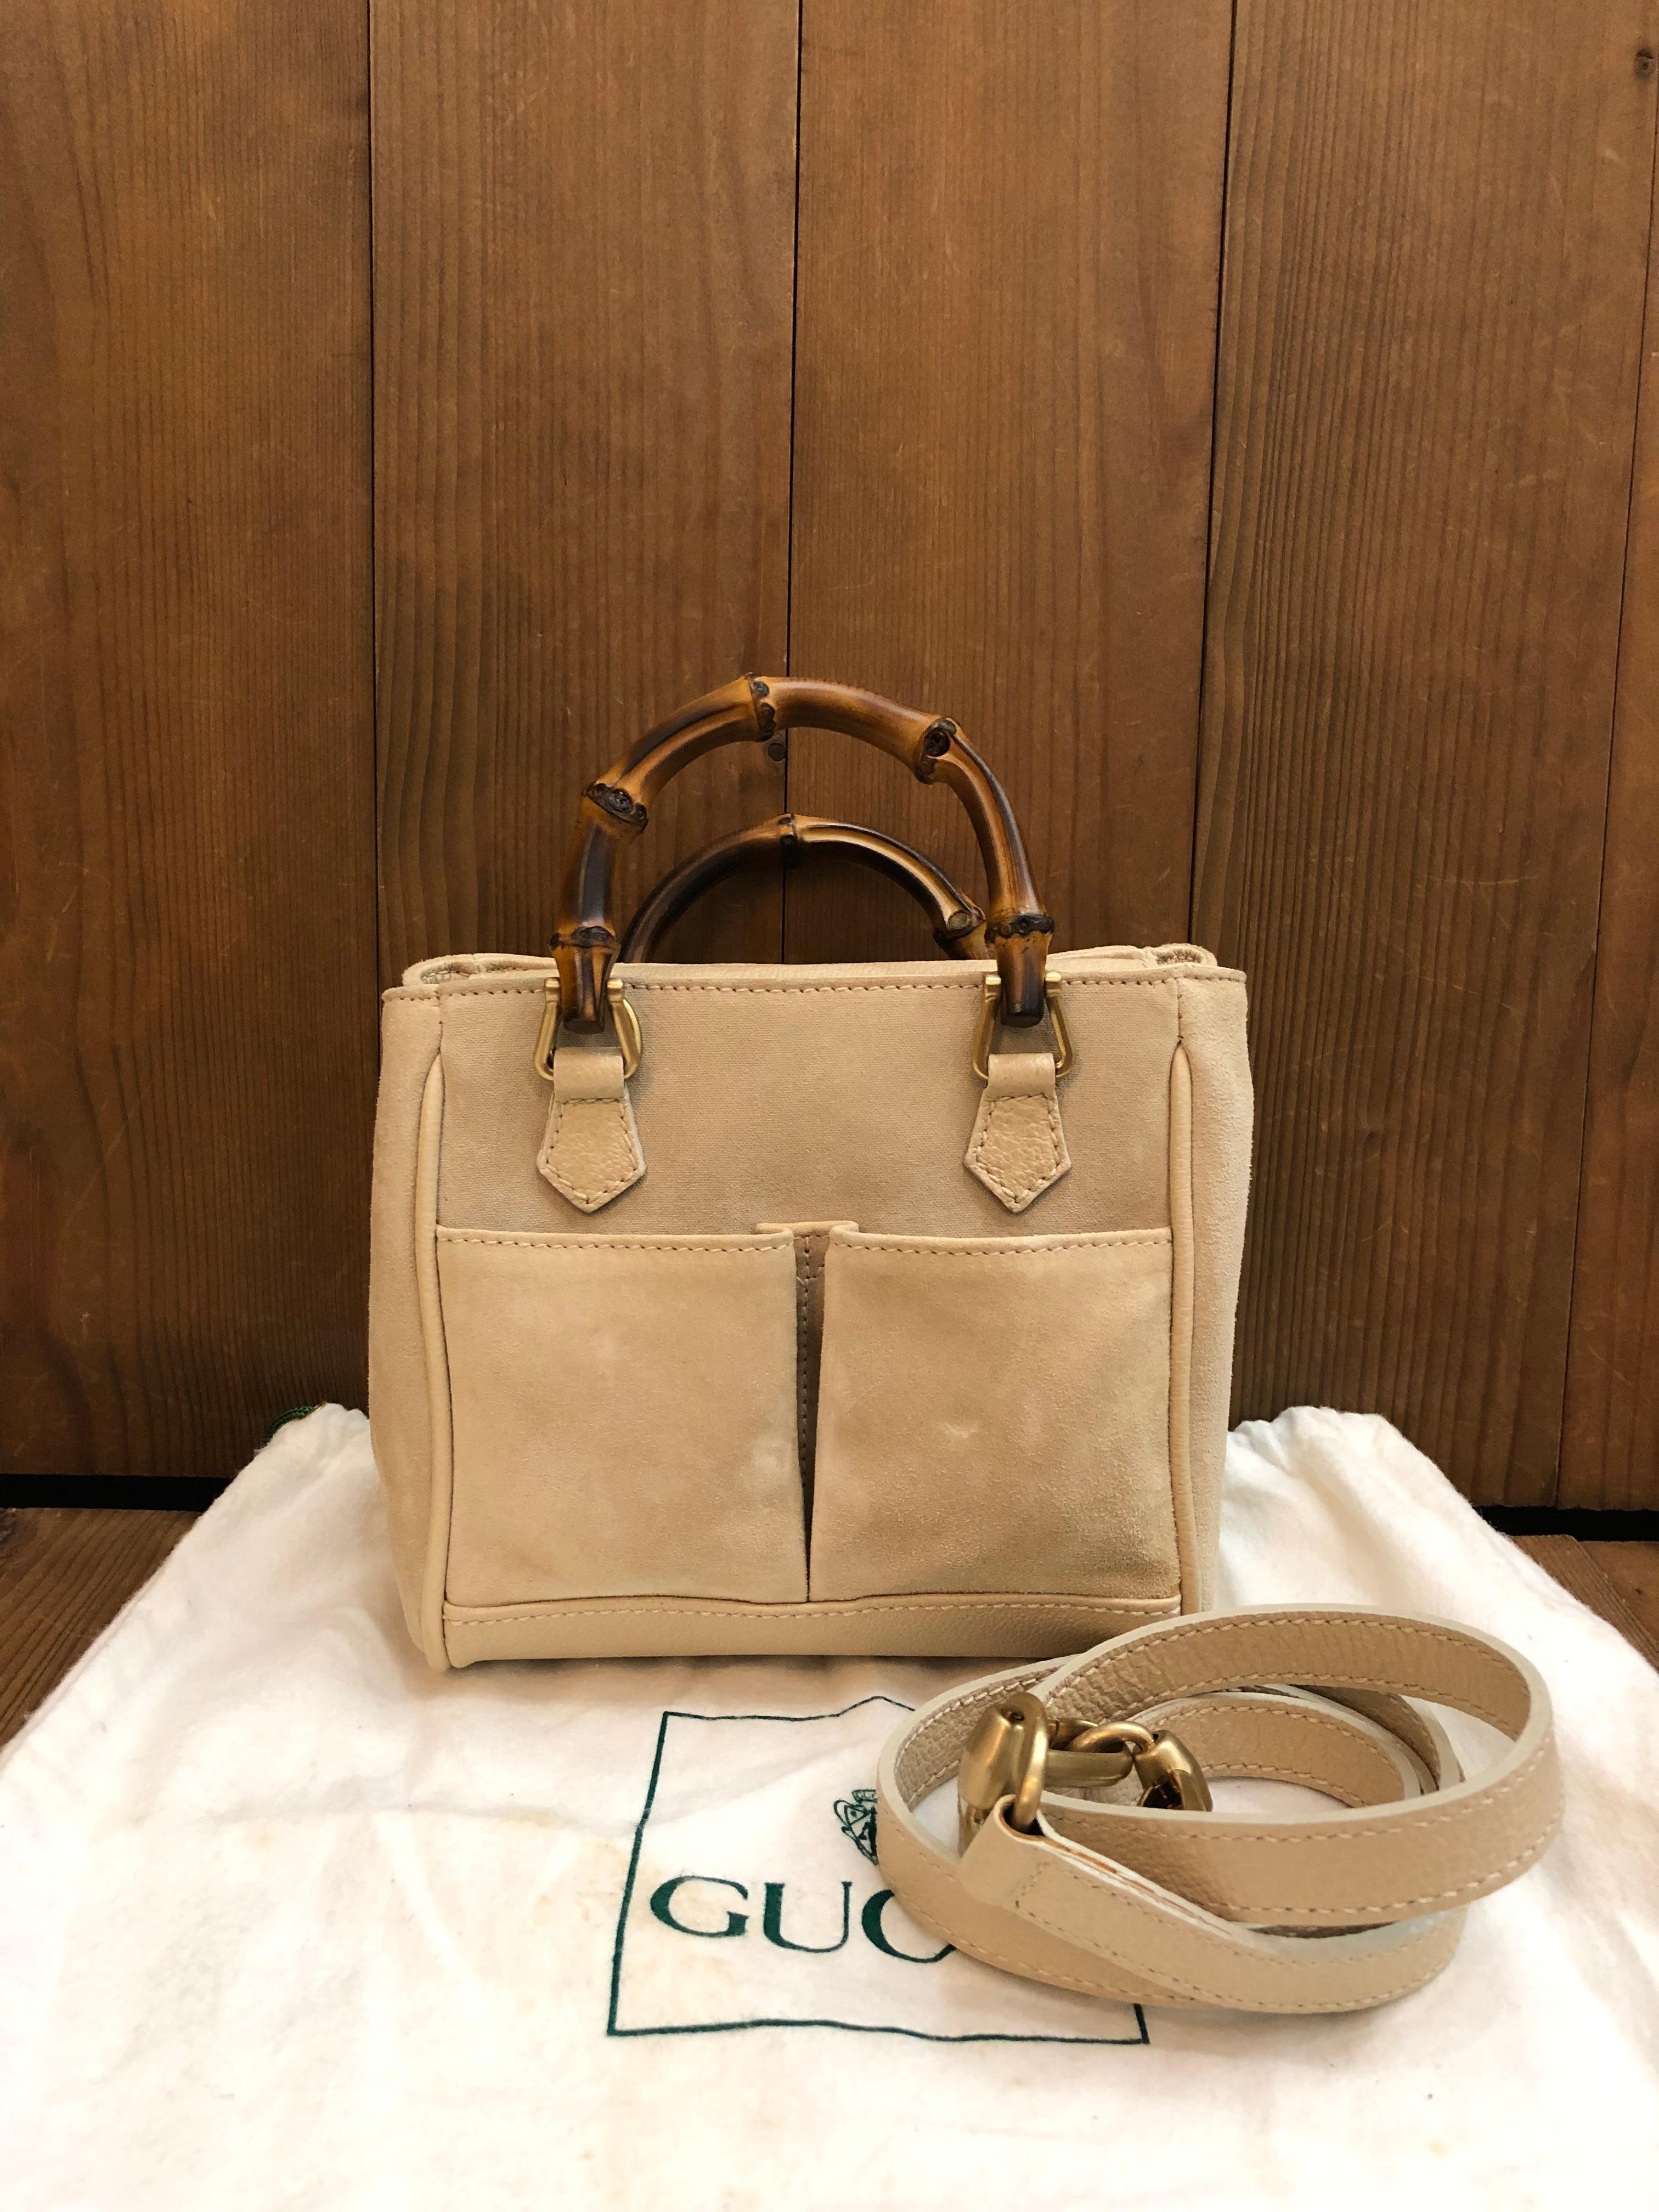 This 1990s vintage GUCCI mini 2-way bamboo crossbody bag is crafted of pigskin and nubuck leather in beige featuring gold toned hardware and bamboo handles. The front of this bag features two open pockets. Top magnetic snap closure opens to a beige